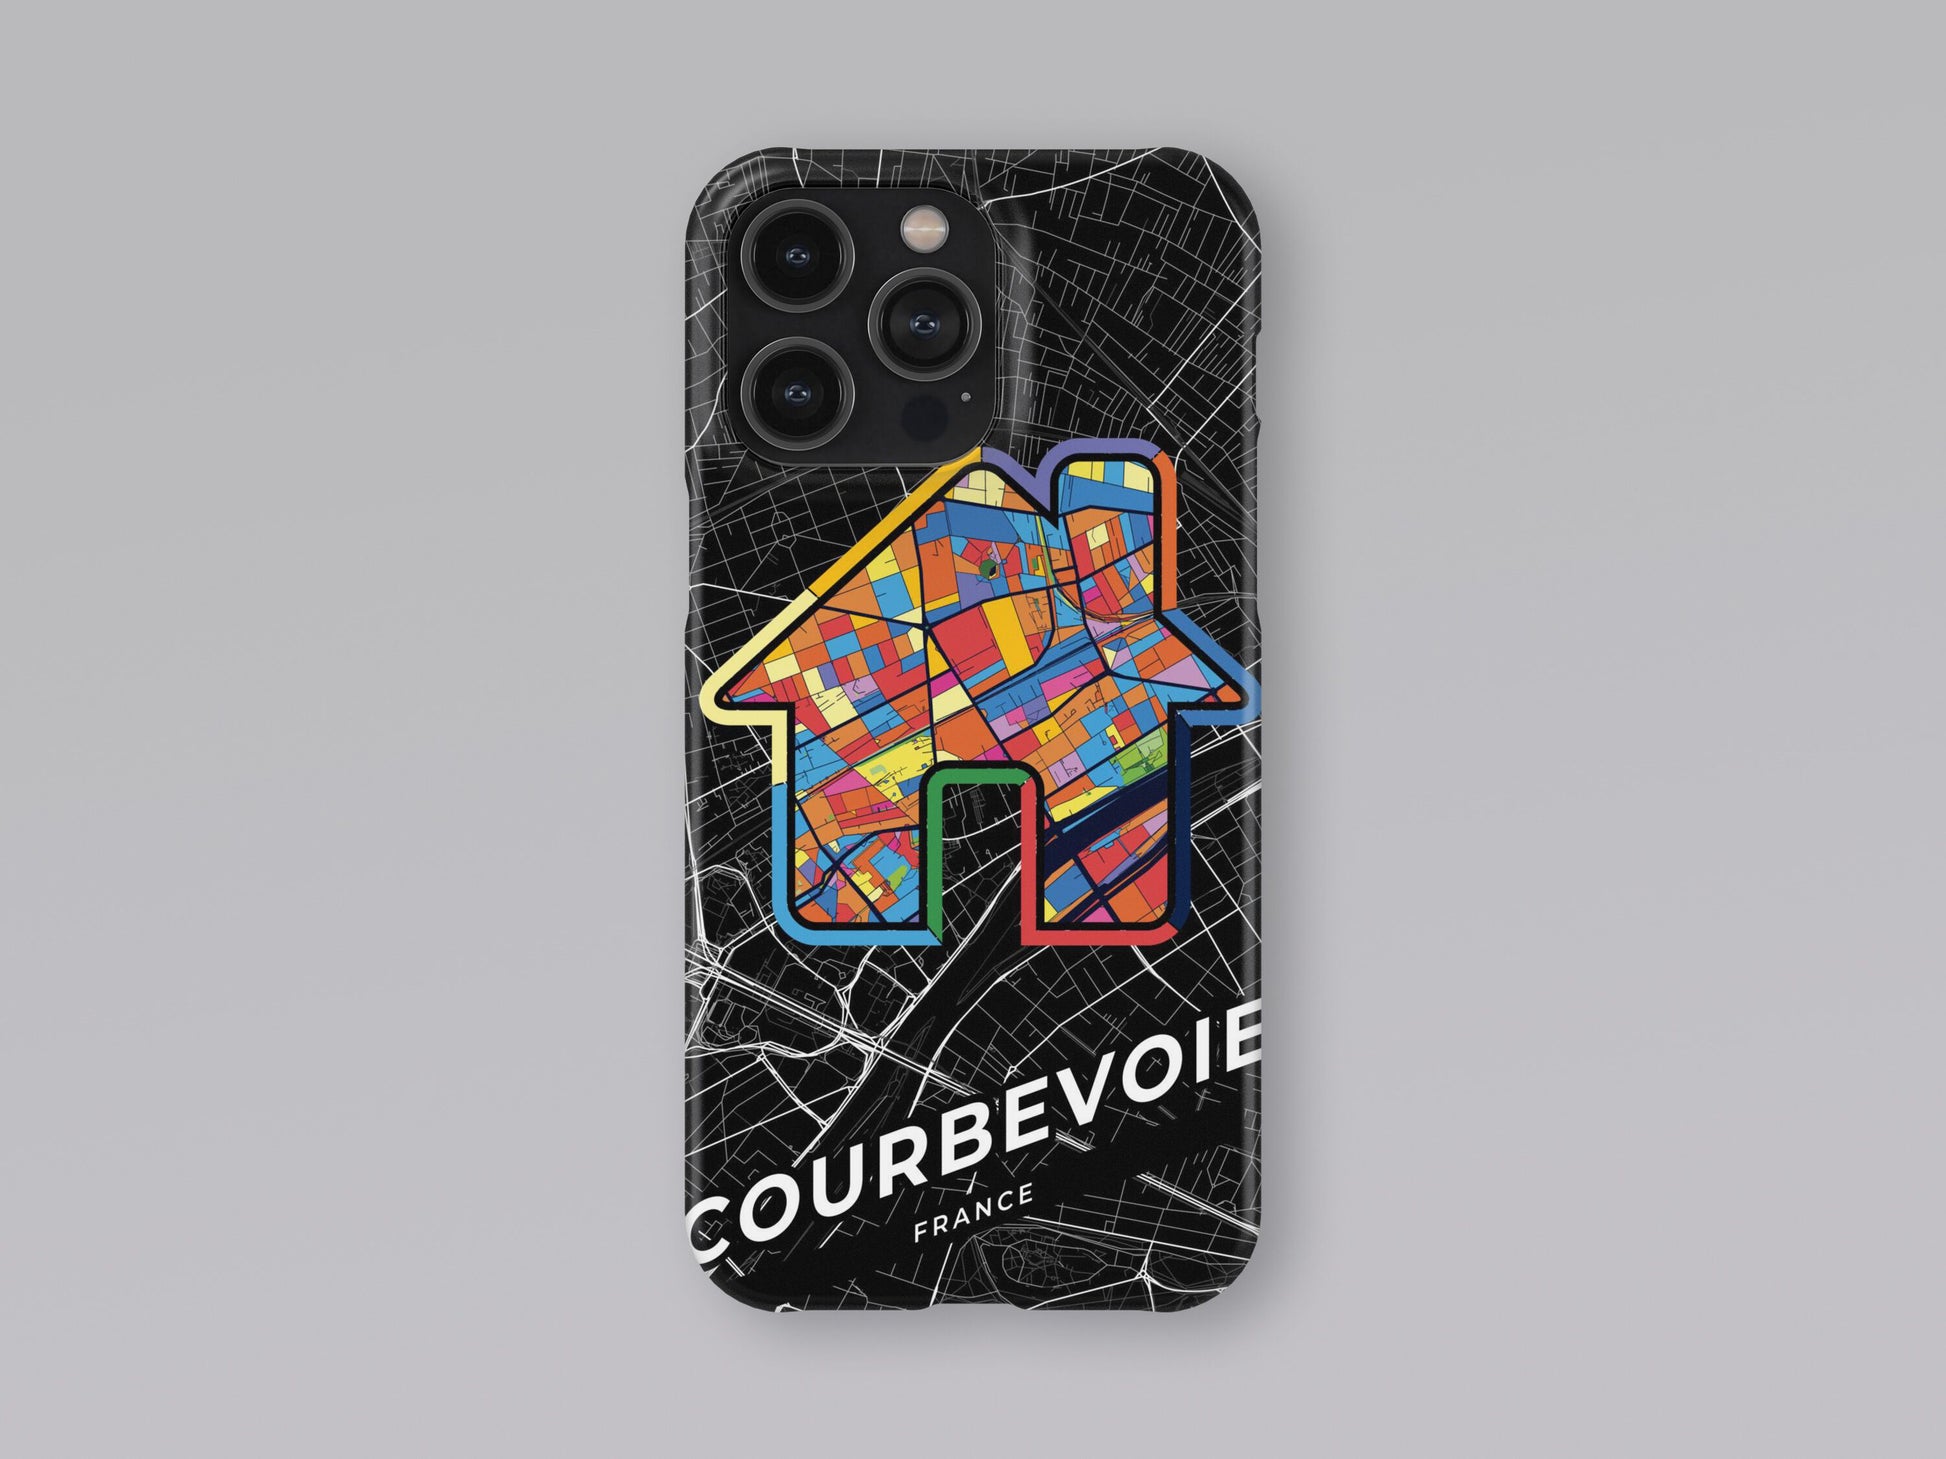 Courbevoie France slim phone case with colorful icon. Birthday, wedding or housewarming gift. Couple match cases. 3